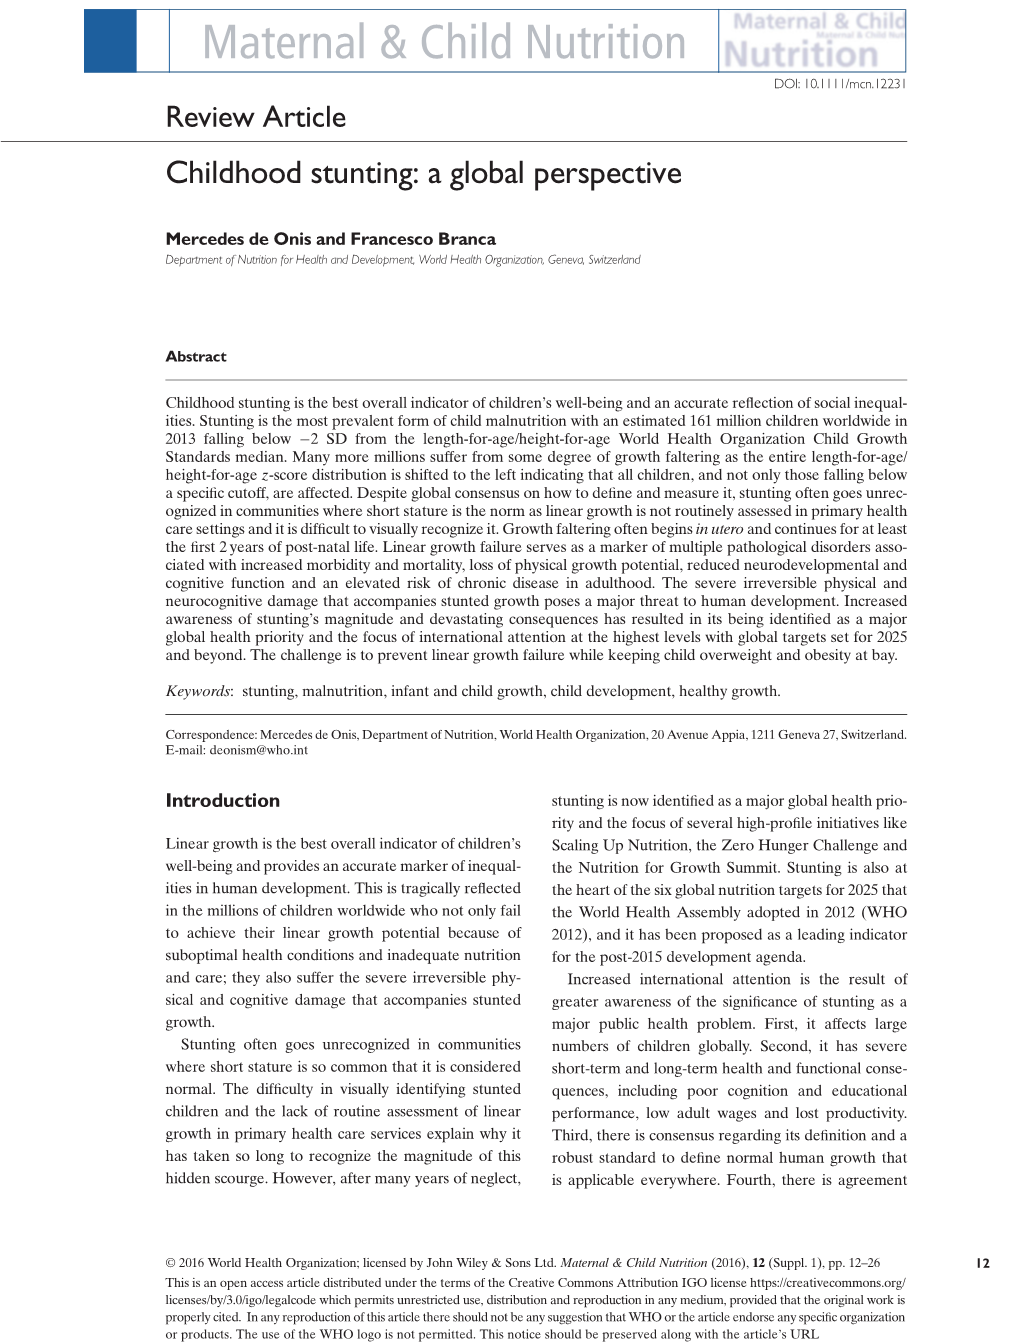 Review Article Childhood Stunting: a Global Perspective